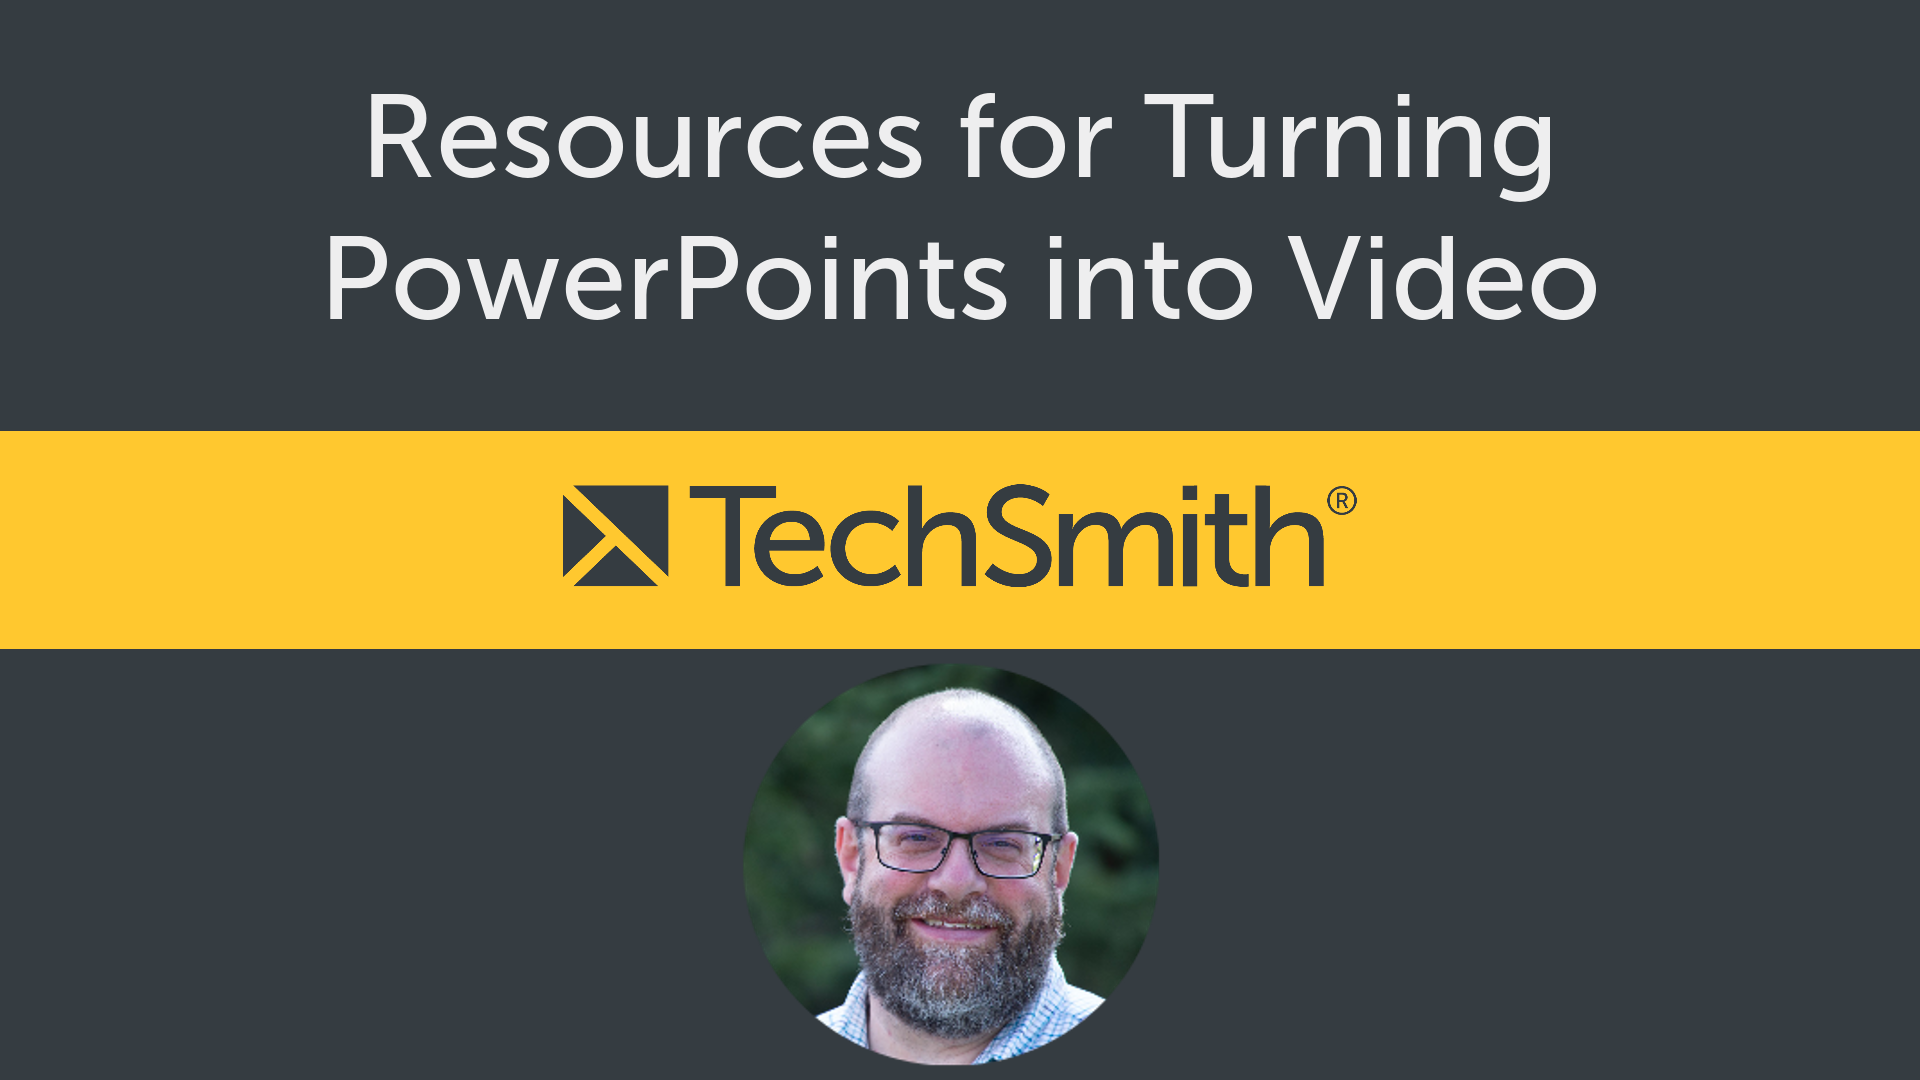 TechSmith's PowerPoint Resources - An Introduction